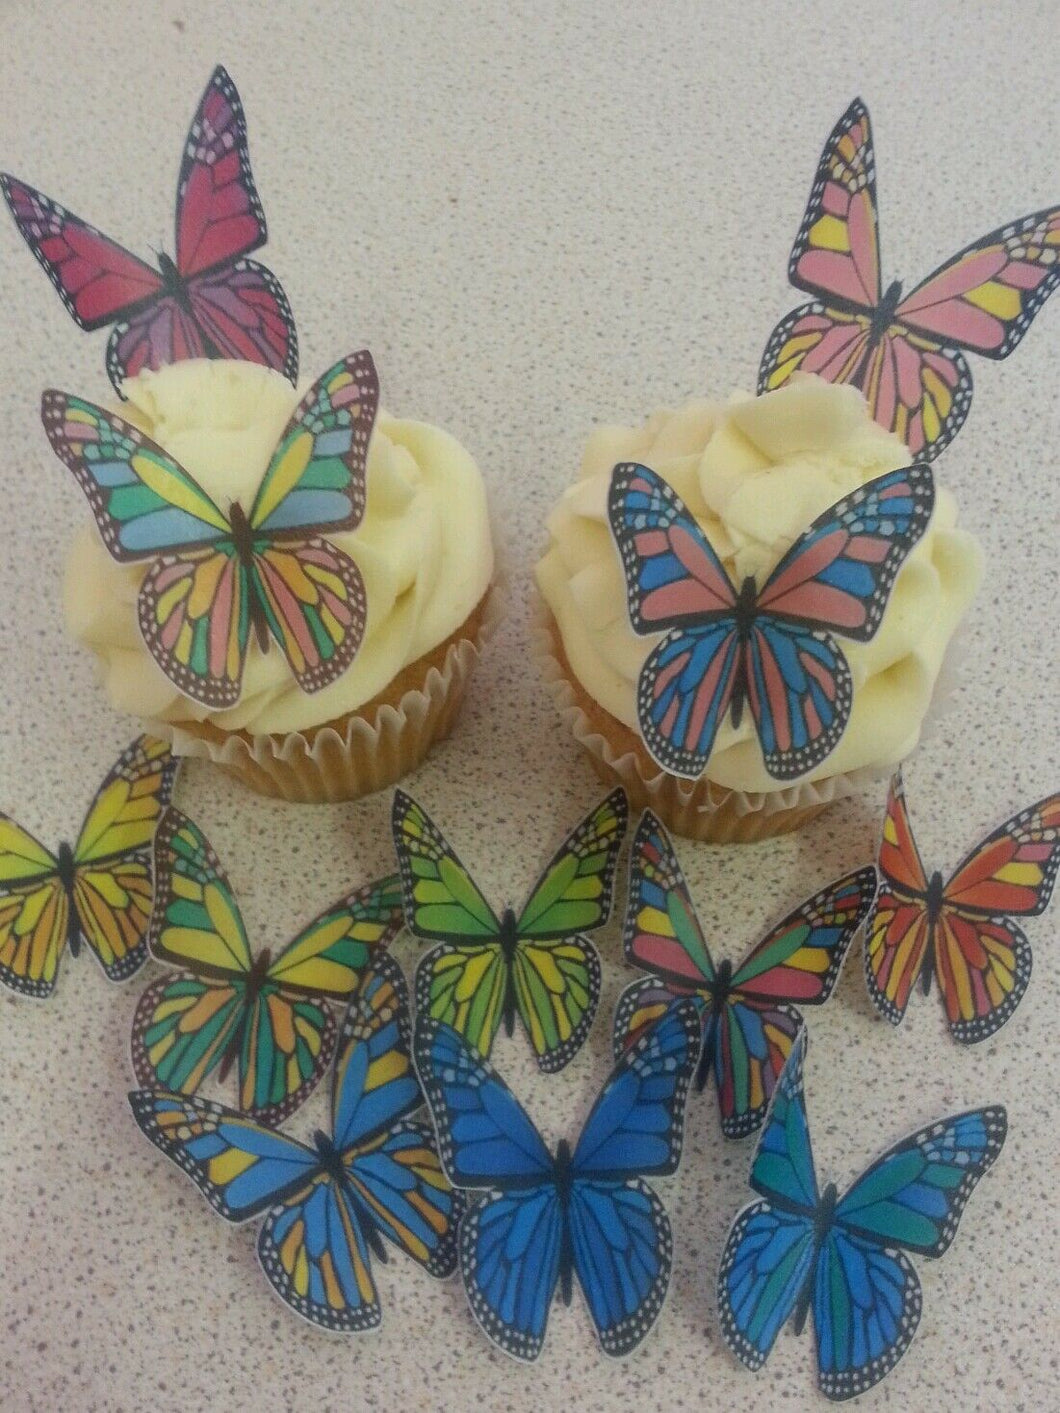 12 PRECUT Multi Coloured Edible wafer paper Butterflies cake/cupcake toppers